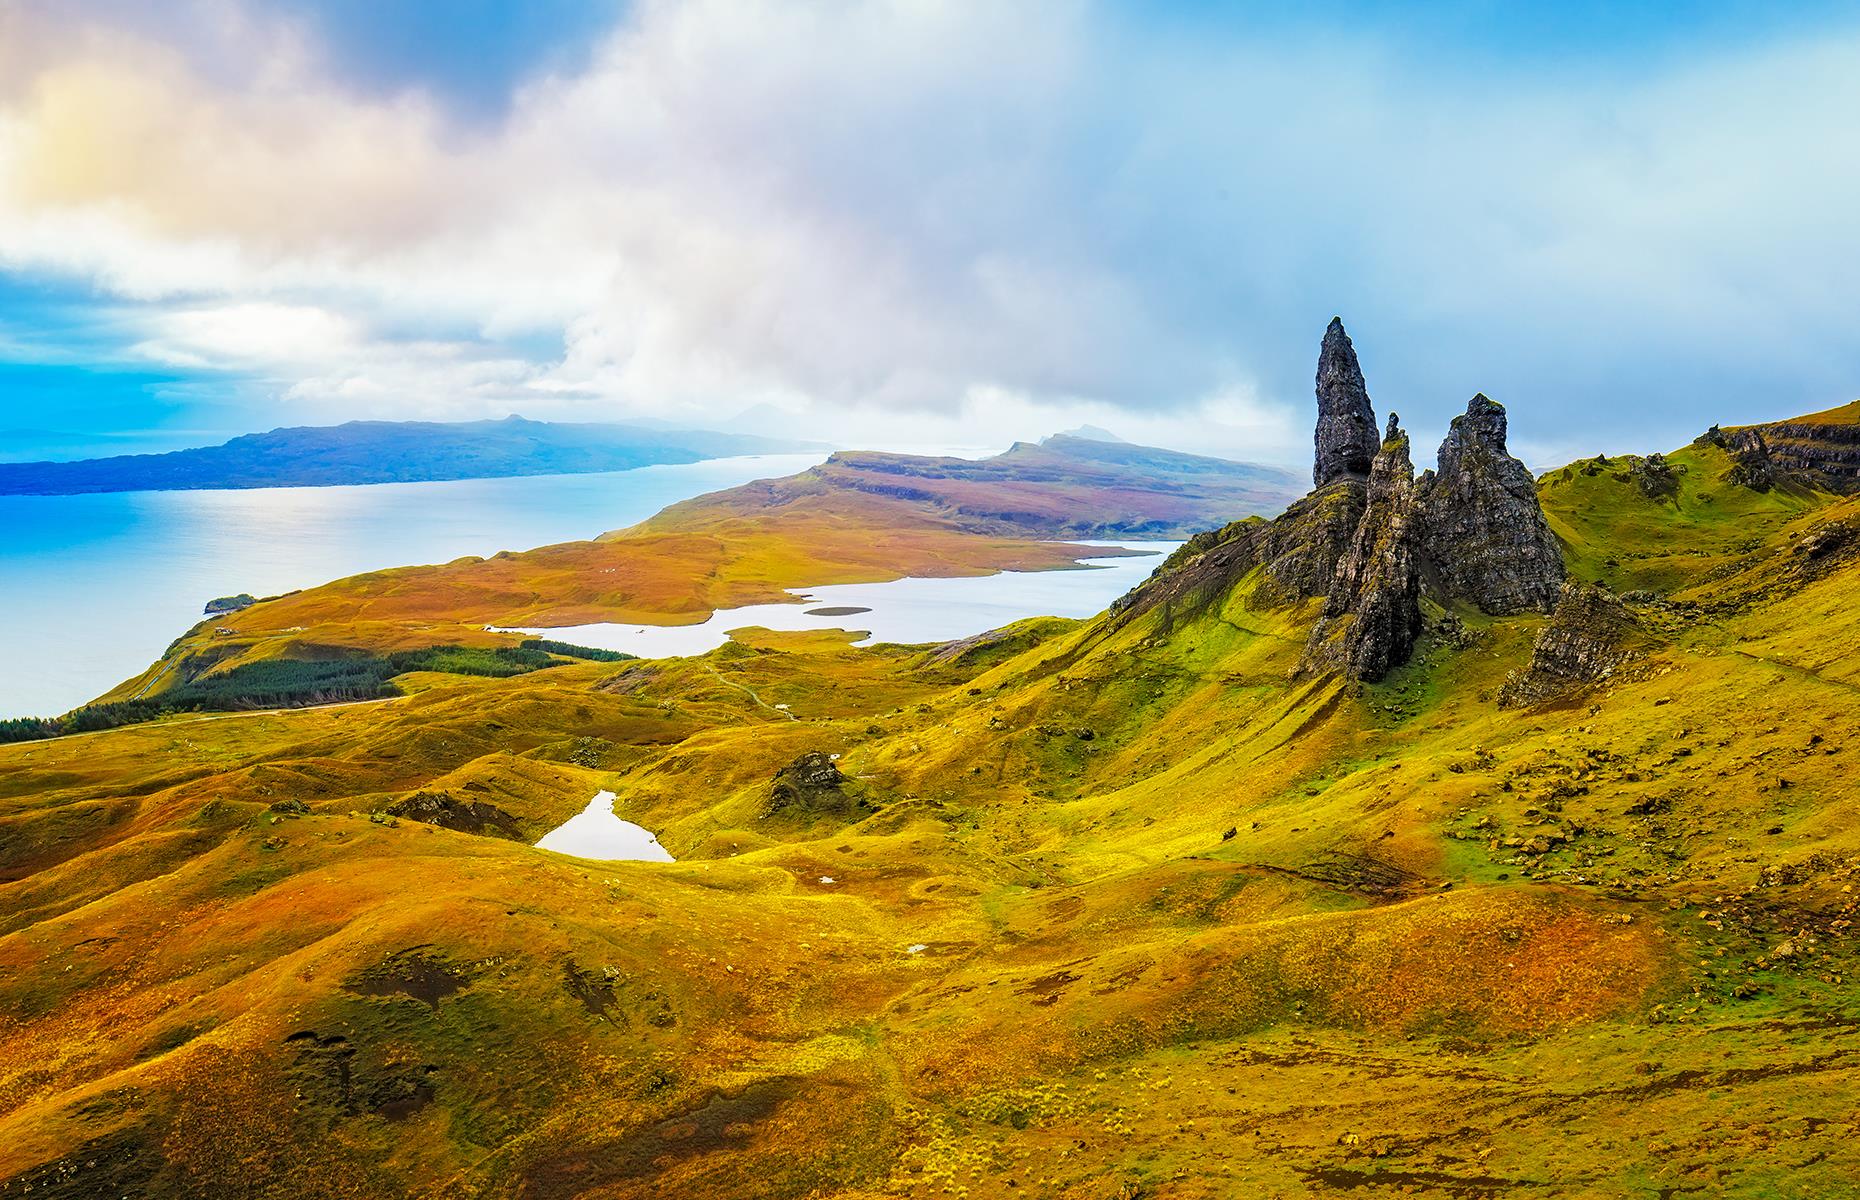 Perched around 2,300 feet (700m) up on Trotternish Ridge, the Old Man of Storr is one of Scotland's most recognizable natural landmarks. Characterized by its towering rocky pinnacles, this theatrical monument is shrouded by folklore tales. Legend has it the Old Man was a giant, who upon being buried in the earth, left his thumb exposed.